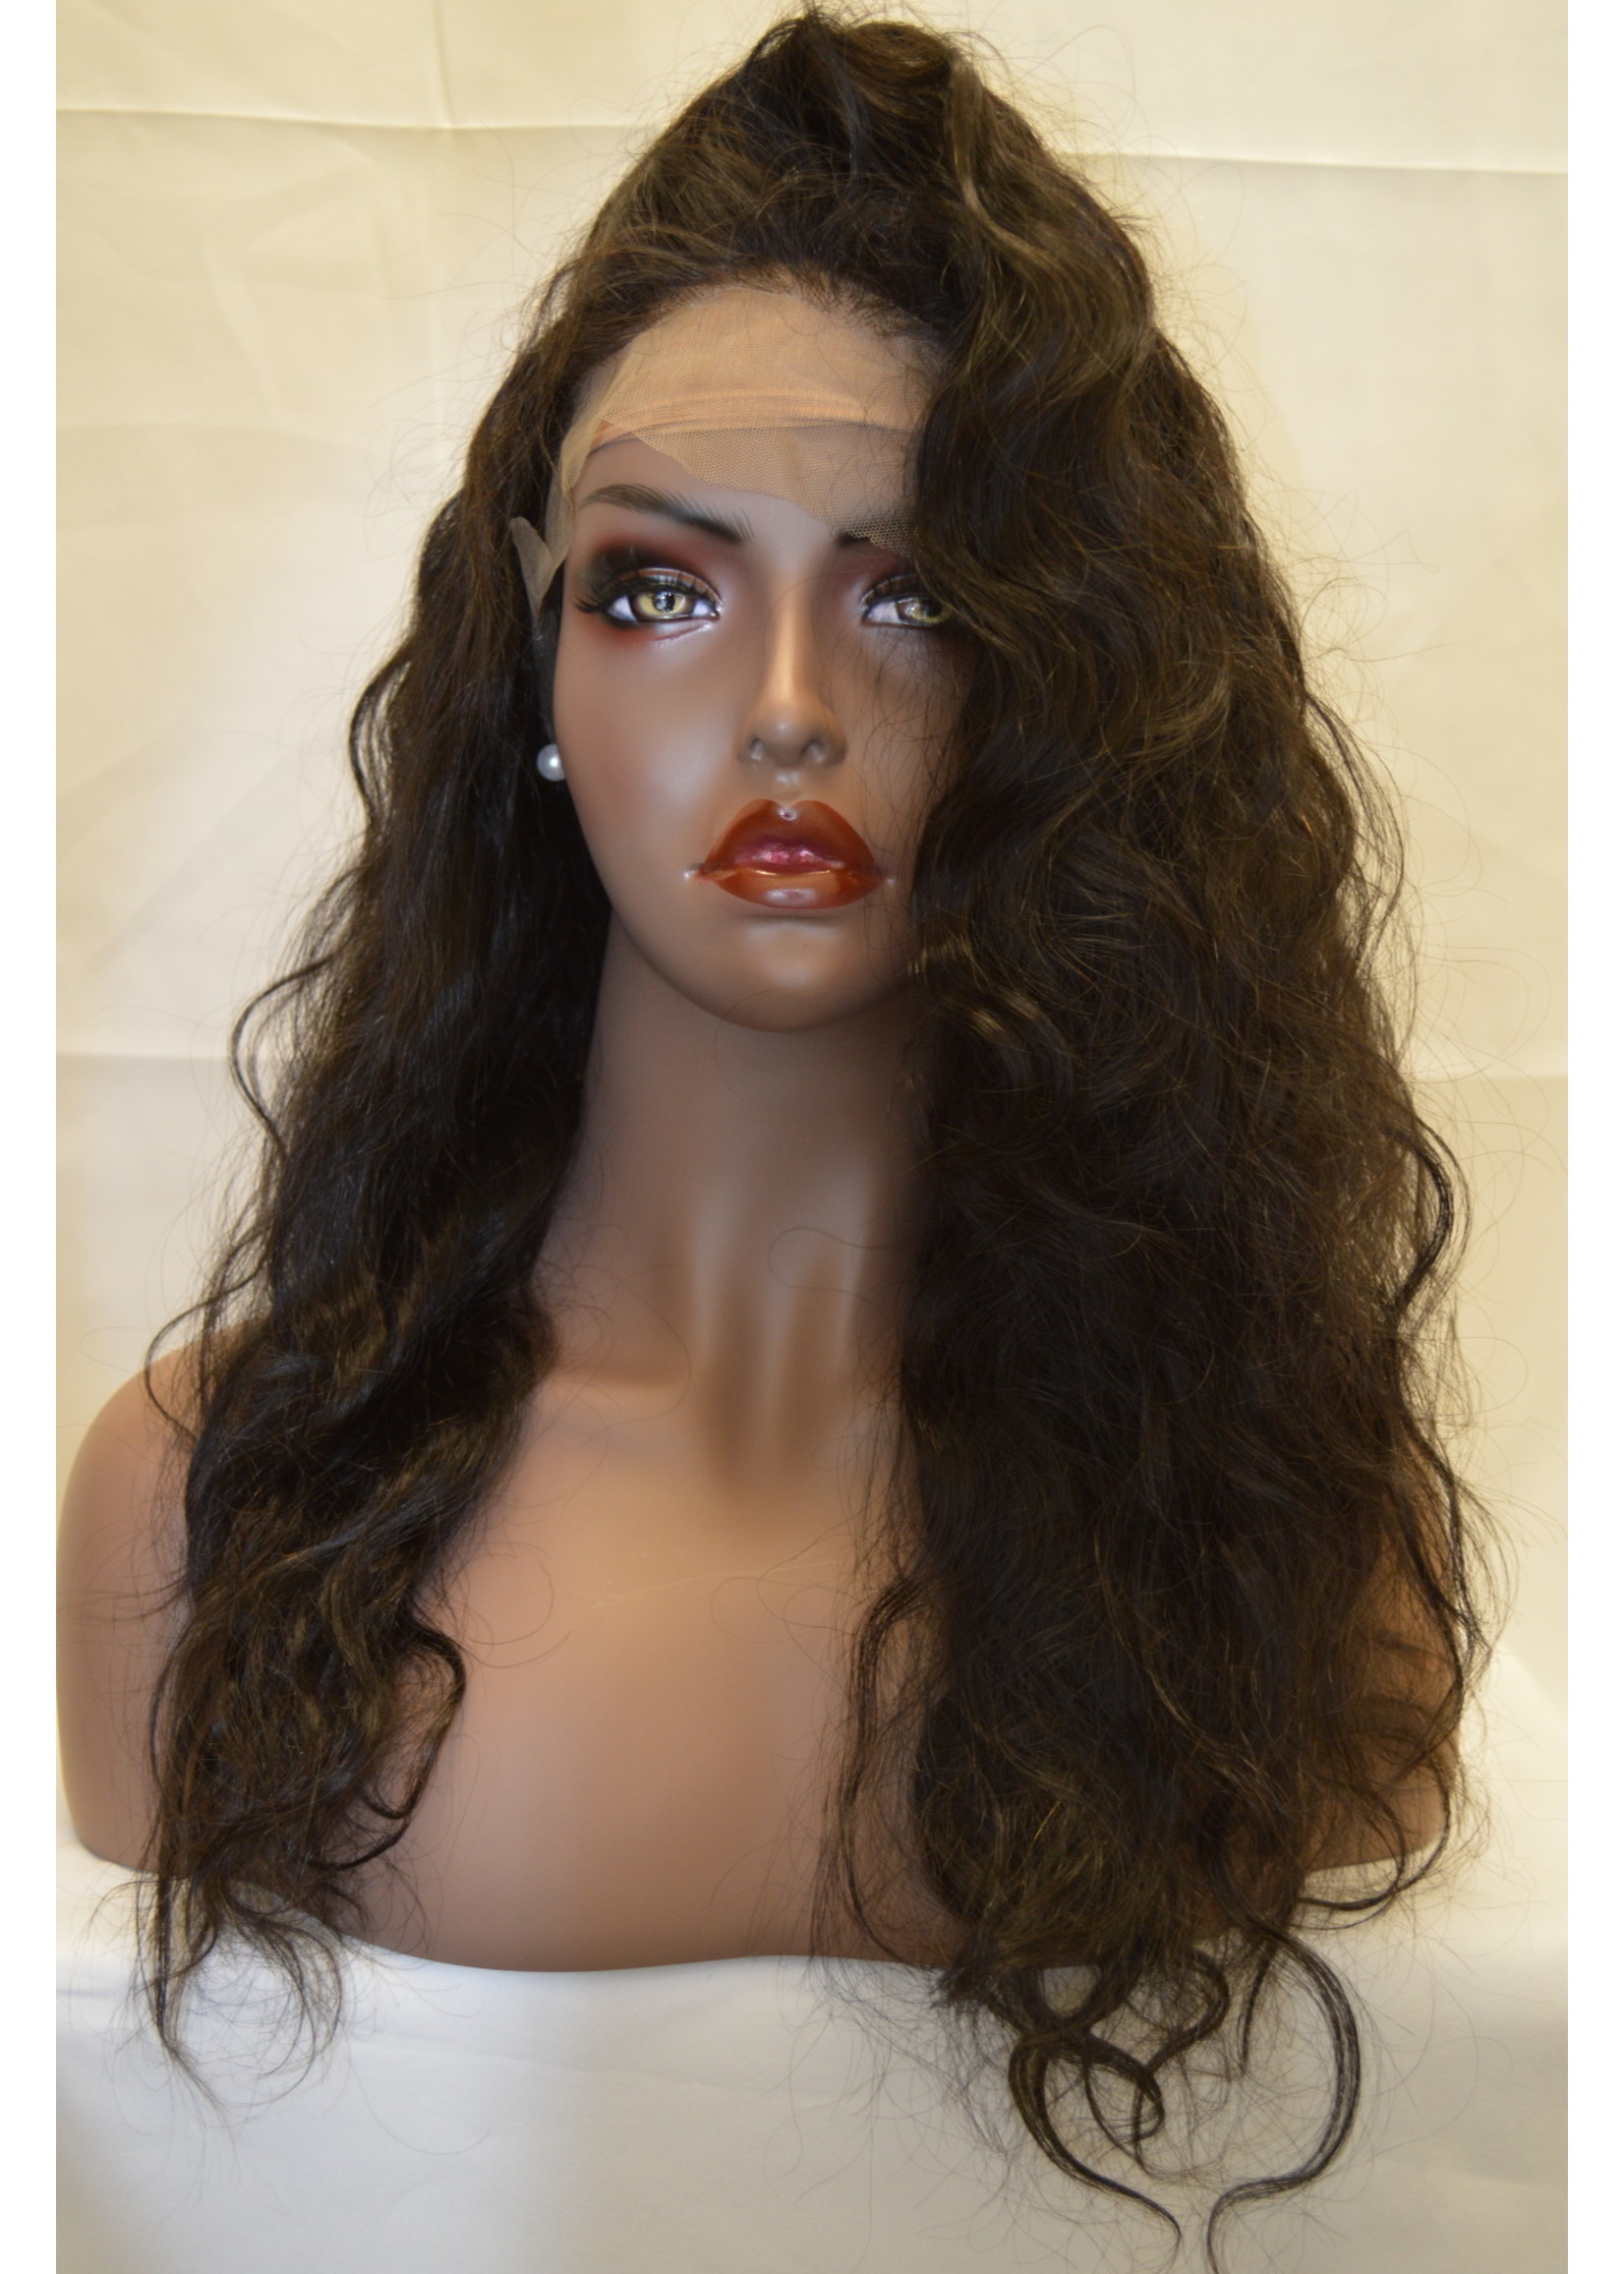 BP 13x4 Lace Frontal Body Wave Virgin Hair Wig